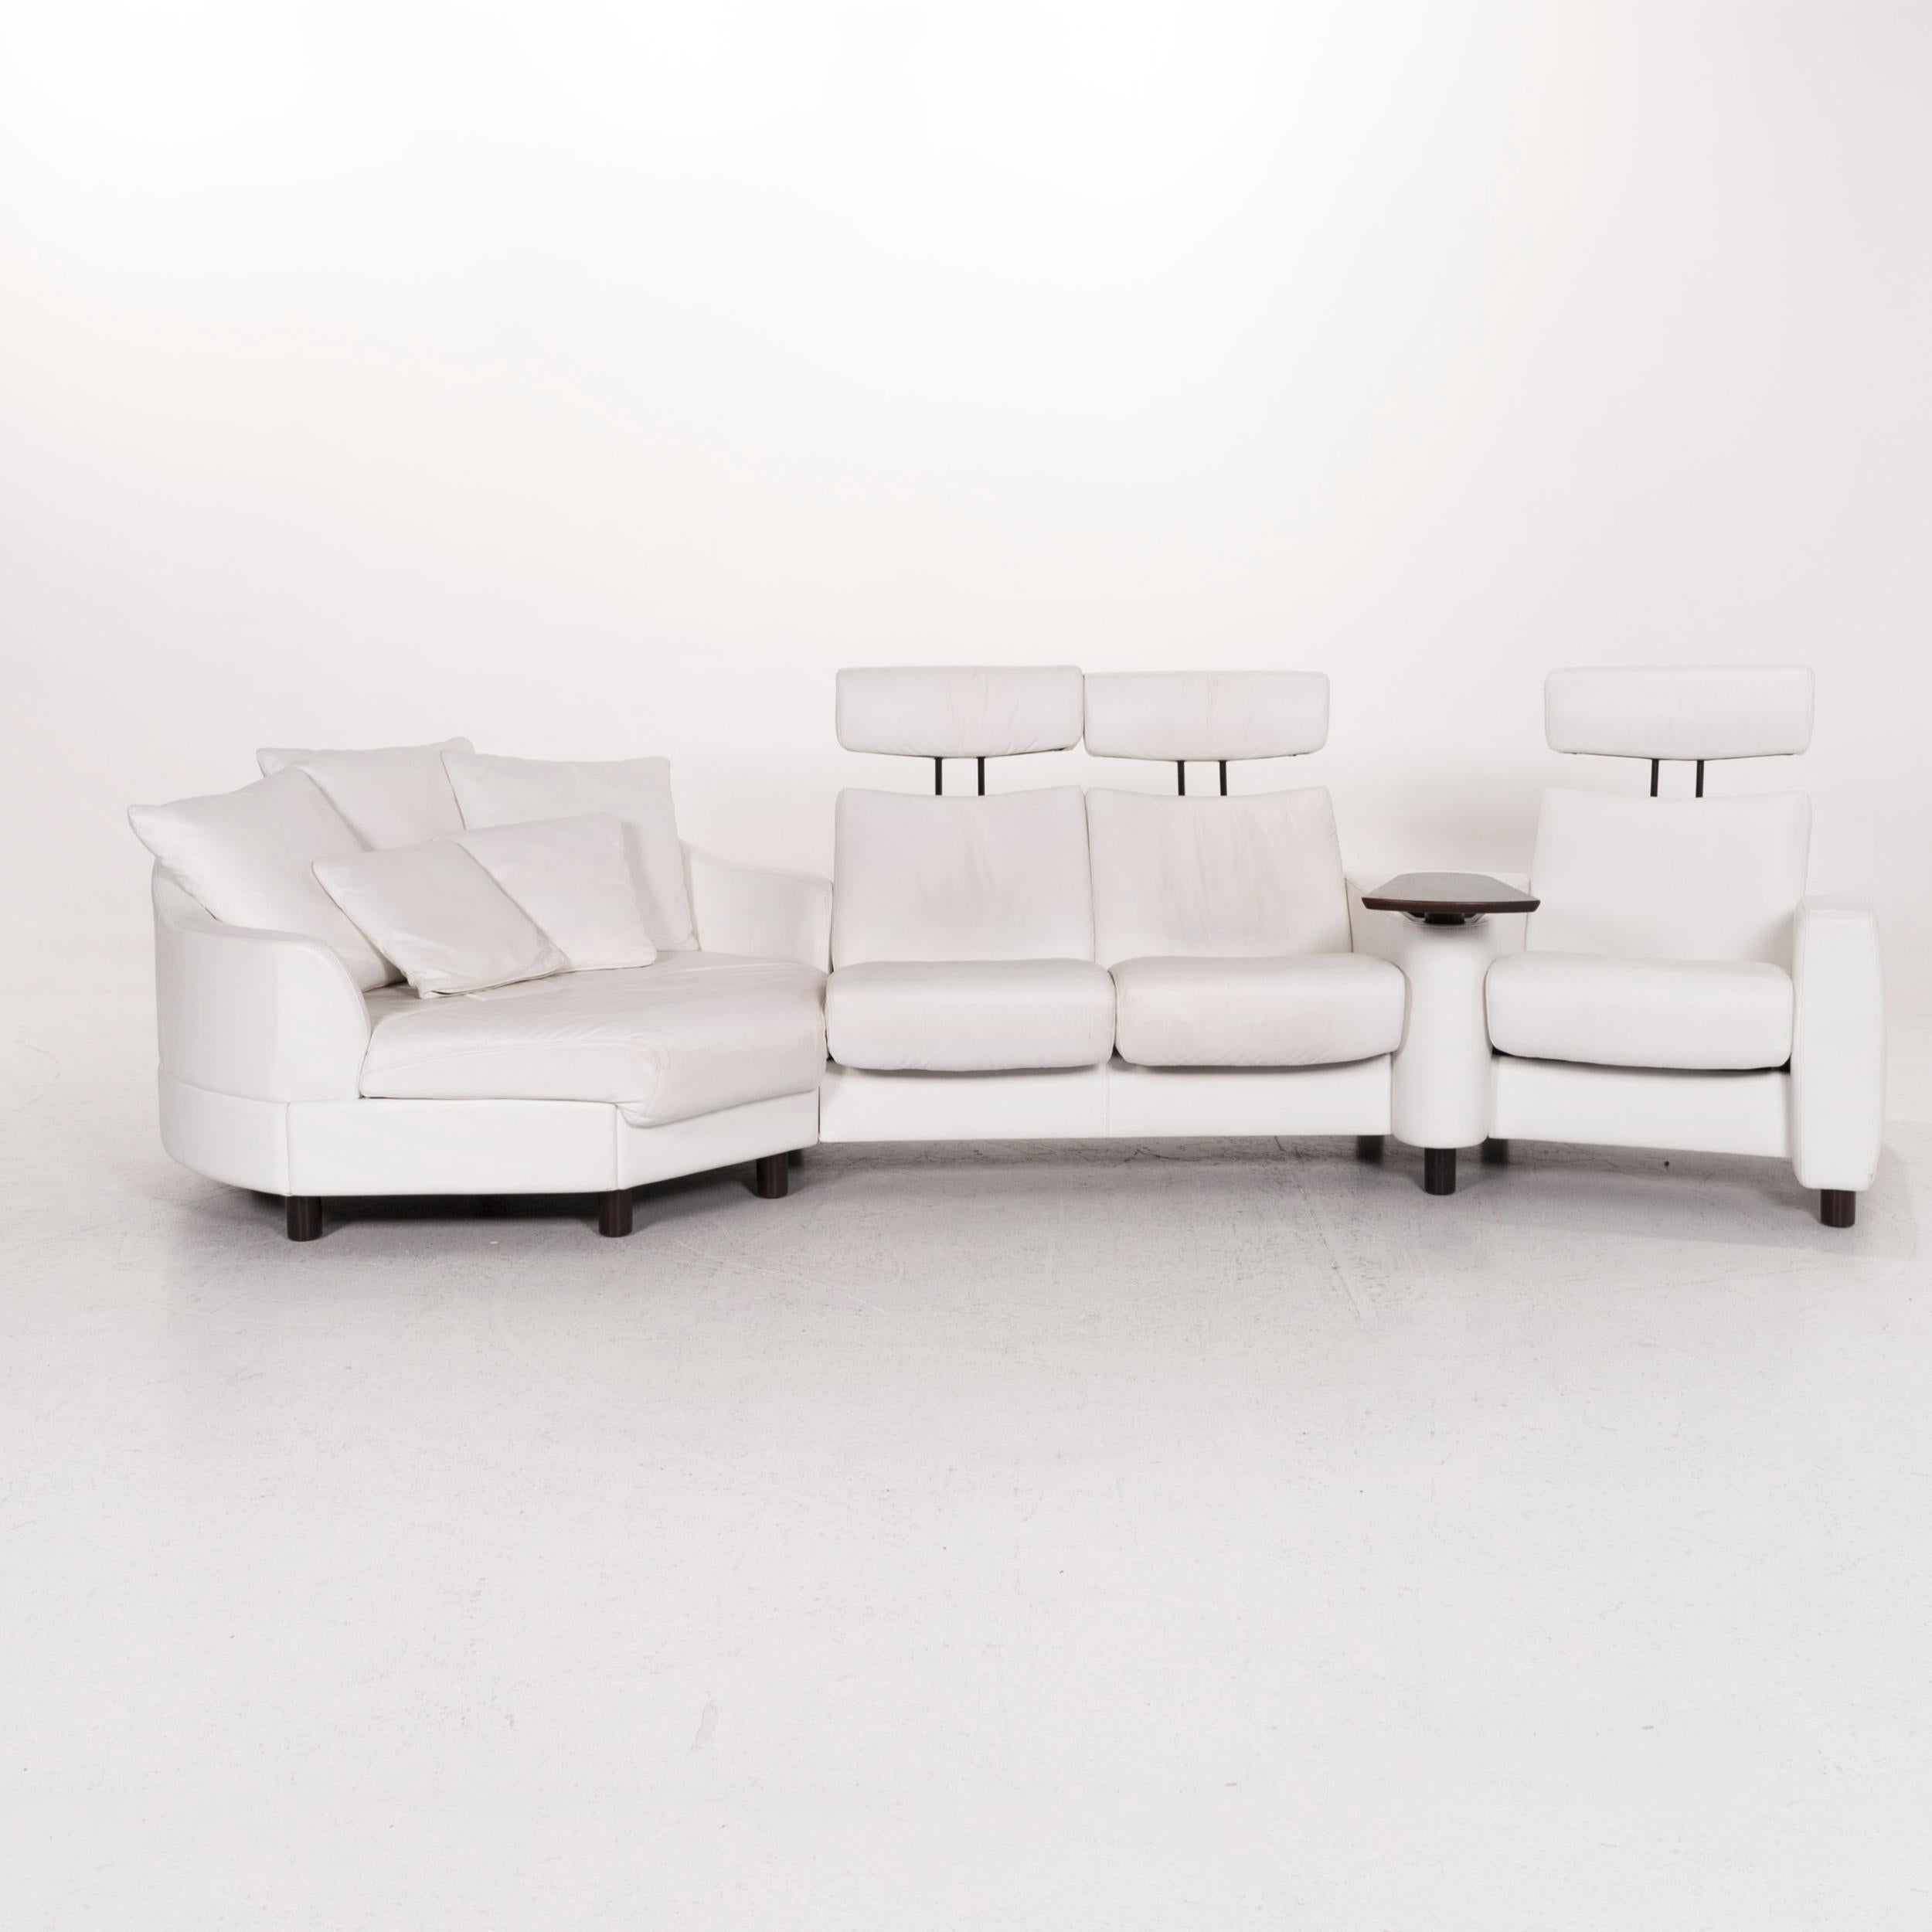 We bring to you a Stressless Arion leather sofa set white 1x corner sofa 1x stool.
 

 Product measurements in centimeters:
 

Depth 83
Width 355
Height 98
Seat-height 44
Rest-height 60
Seat-depth 50
Seat-width 213
Back-height 57.
 